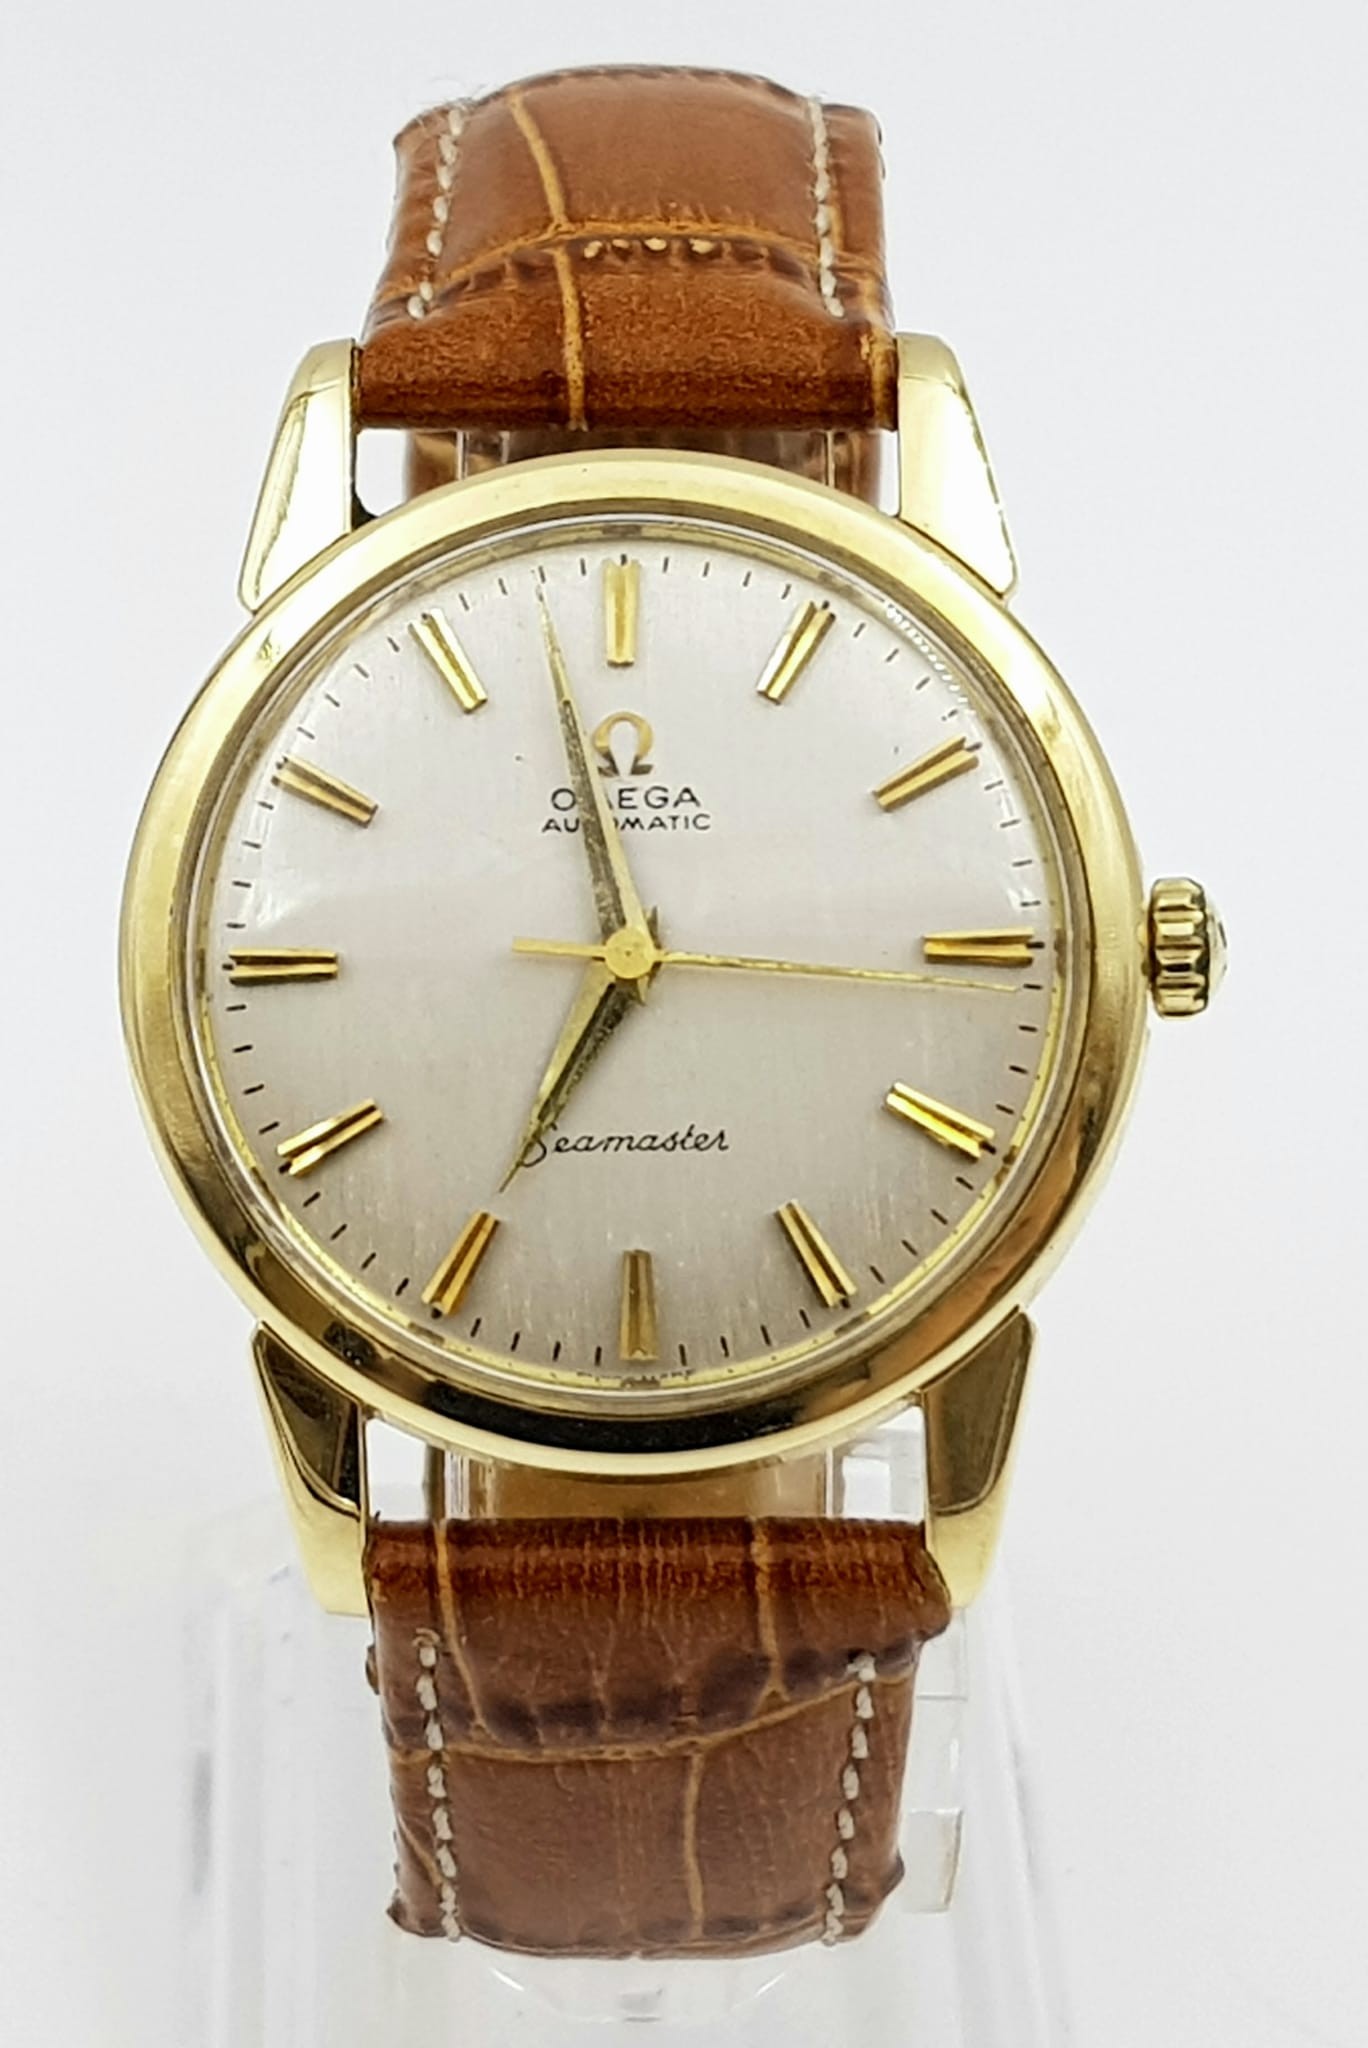 A VINTAGE 9K GOLD OMEGA SEAMASTER AUTOMATIC WATCH WITH LEATHER STRAP , RECENTLY SERVICED. 34MM